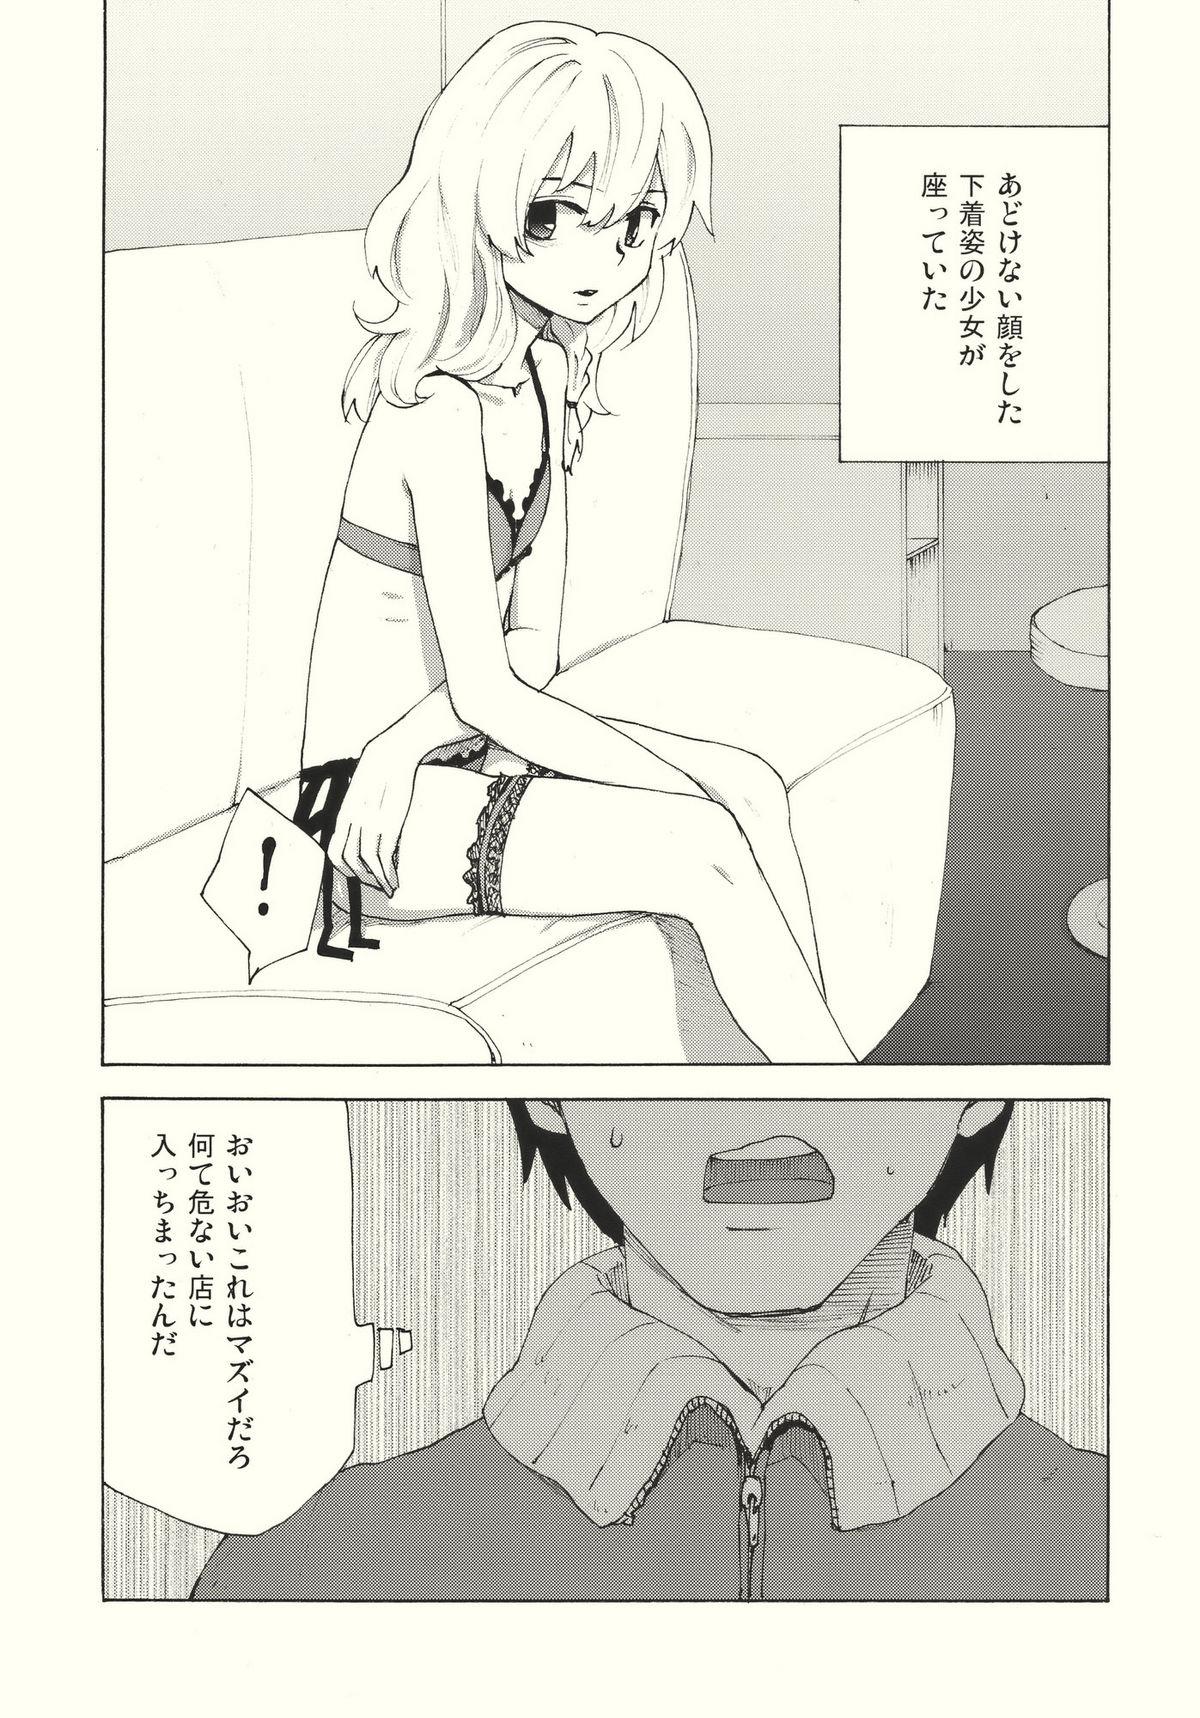 Hot Girls Getting Fucked Kirisame Roman Porno - Touhou project Tight - Page 7